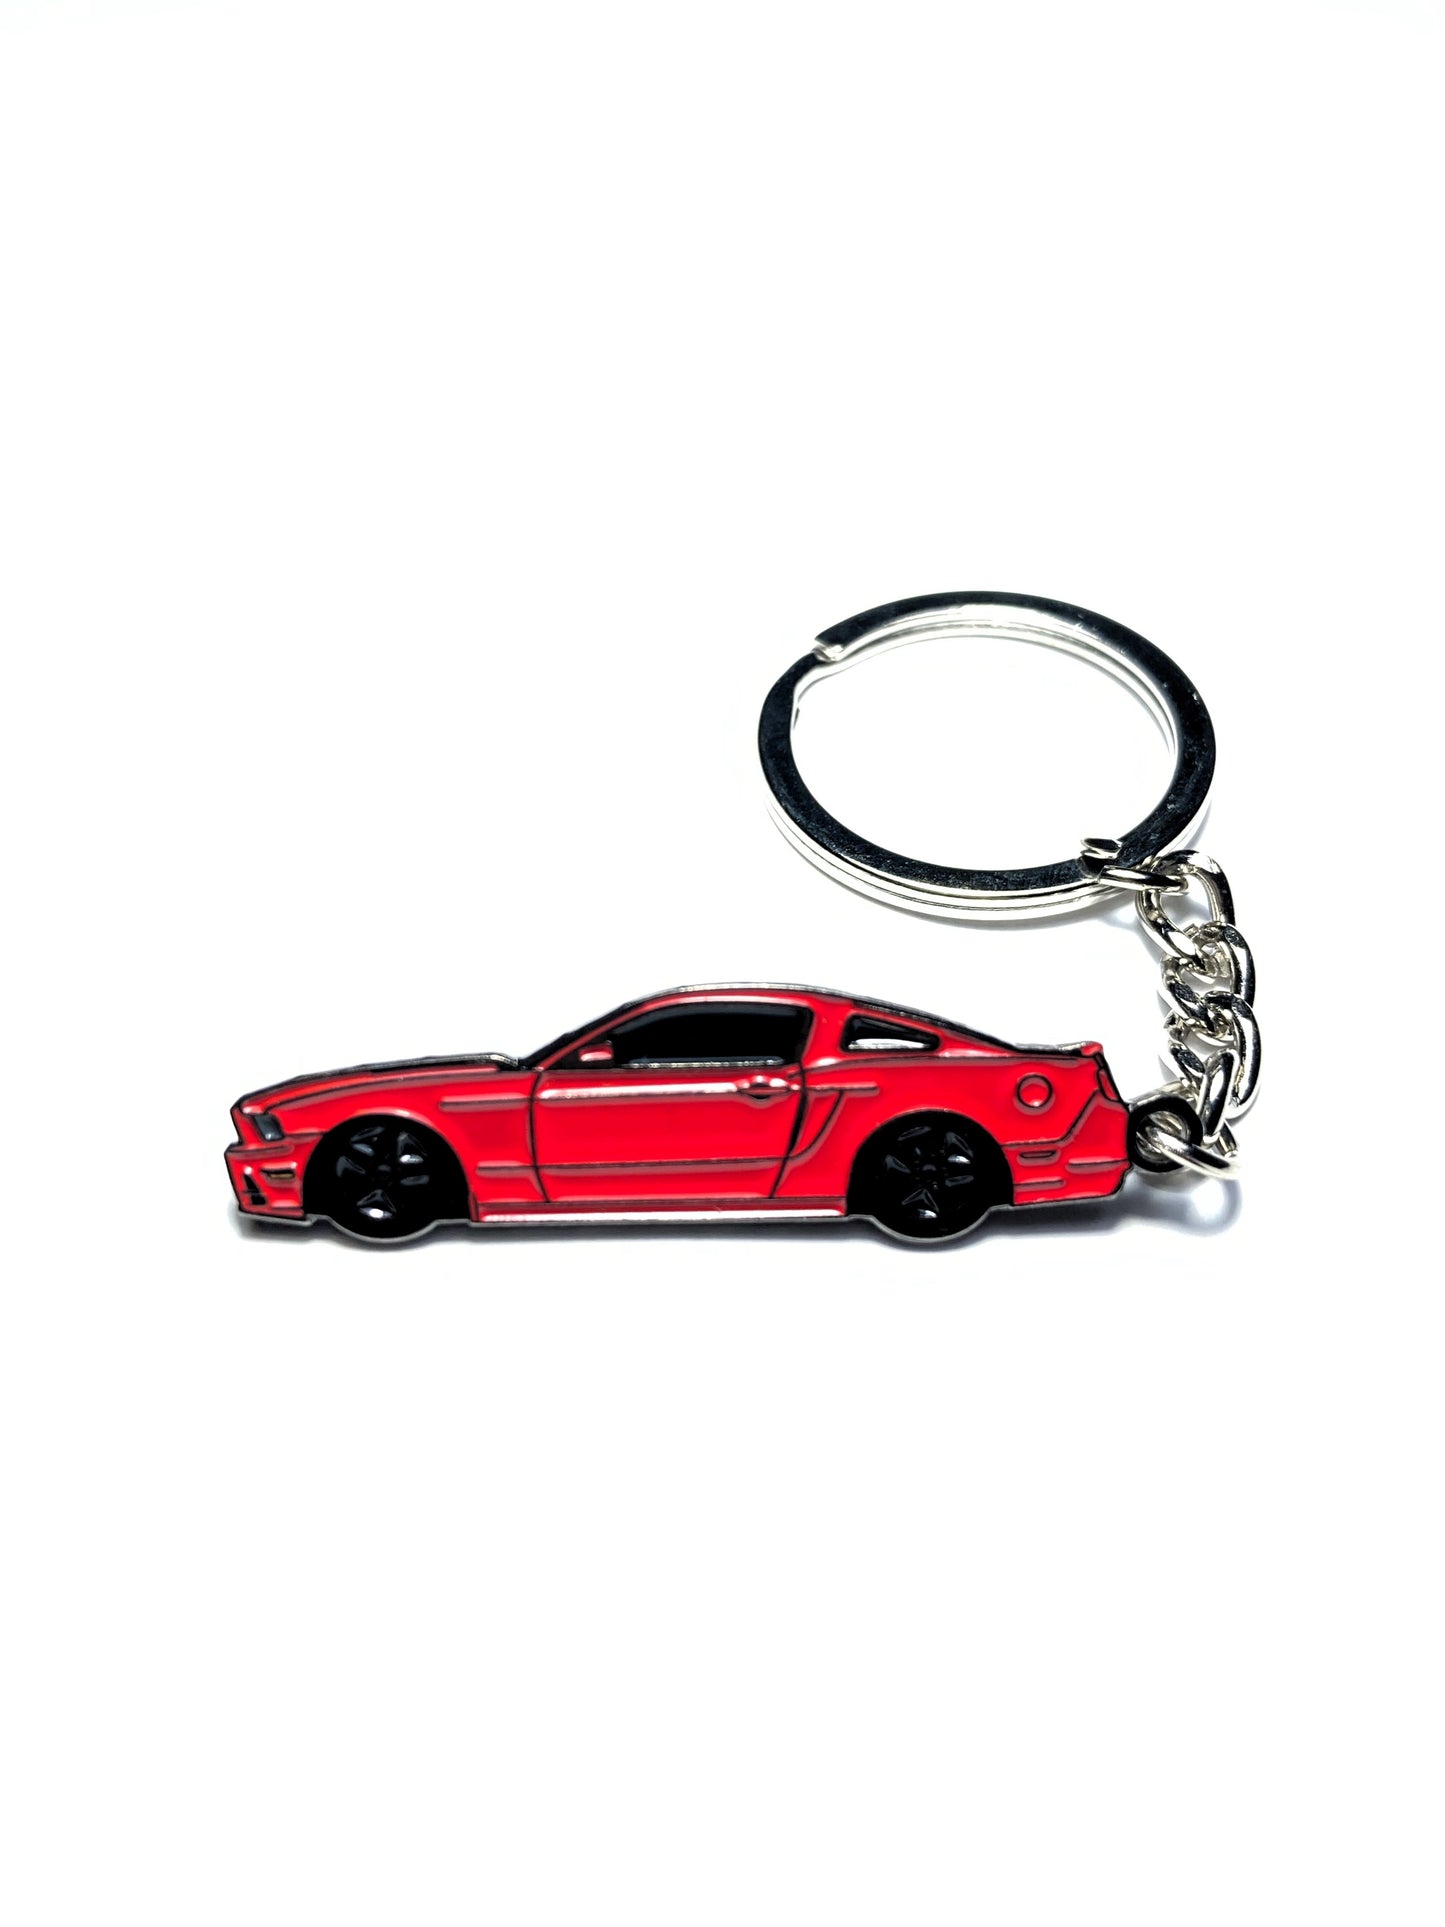 Mustang S197 (2013-2014) Keychains